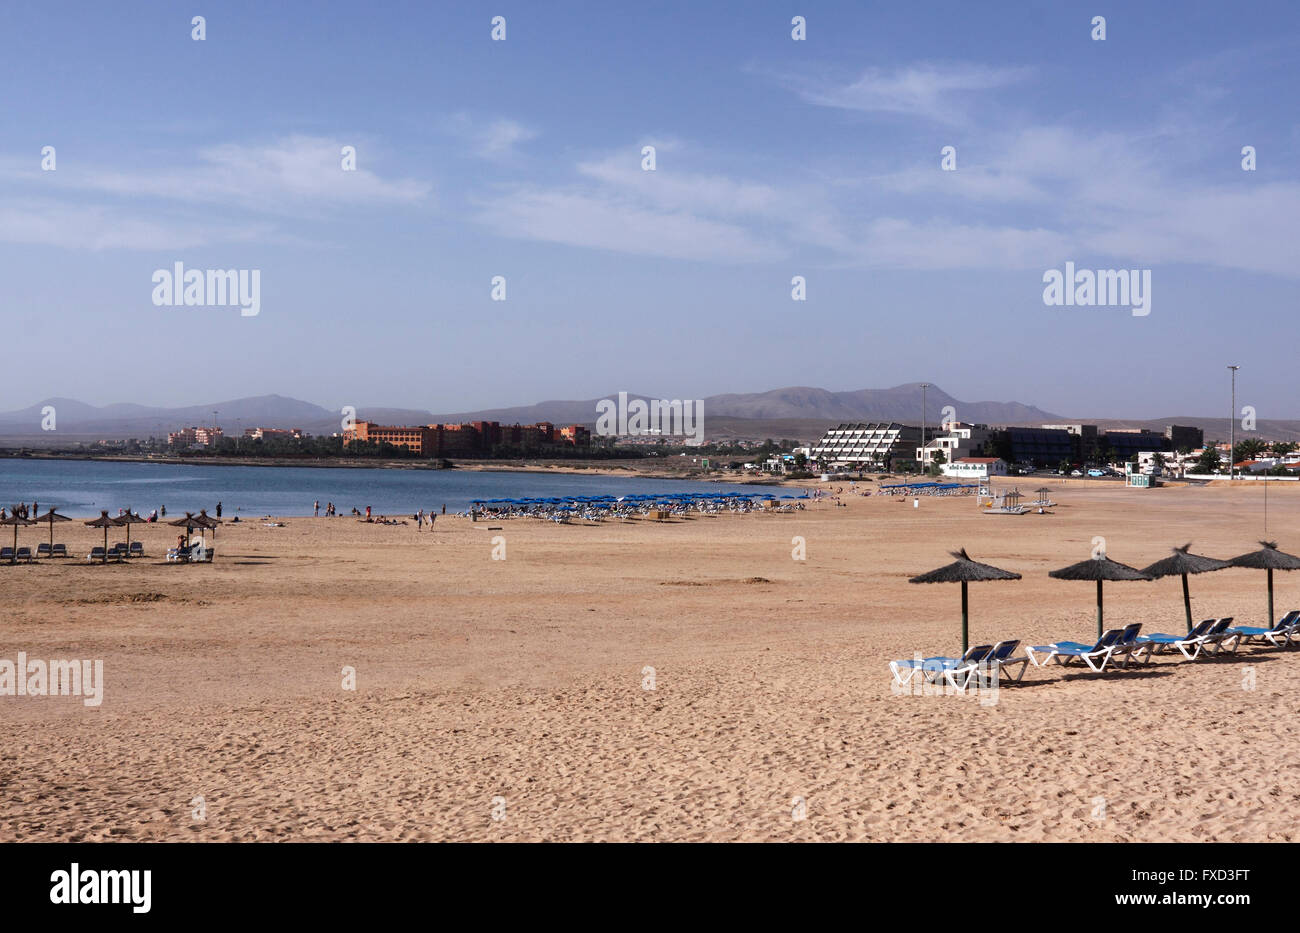 Caleta de fuste winter hi-res stock photography and images image